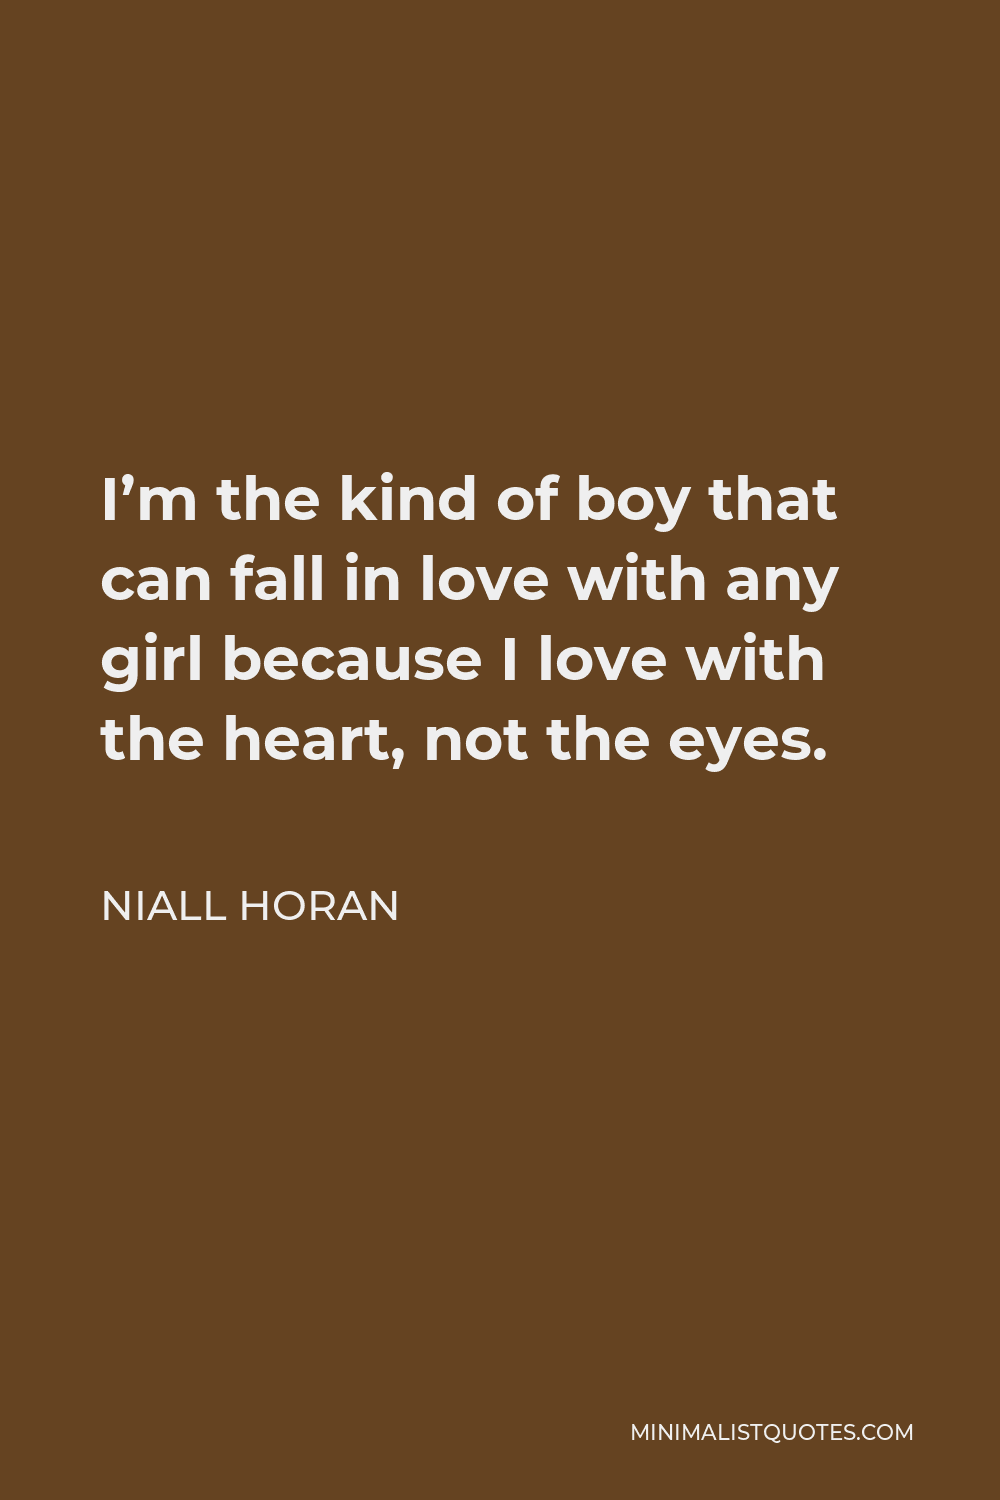 Niall Horan Quote - I’m the kind of boy that can fall in love with any girl because I love with the heart, not the eyes.